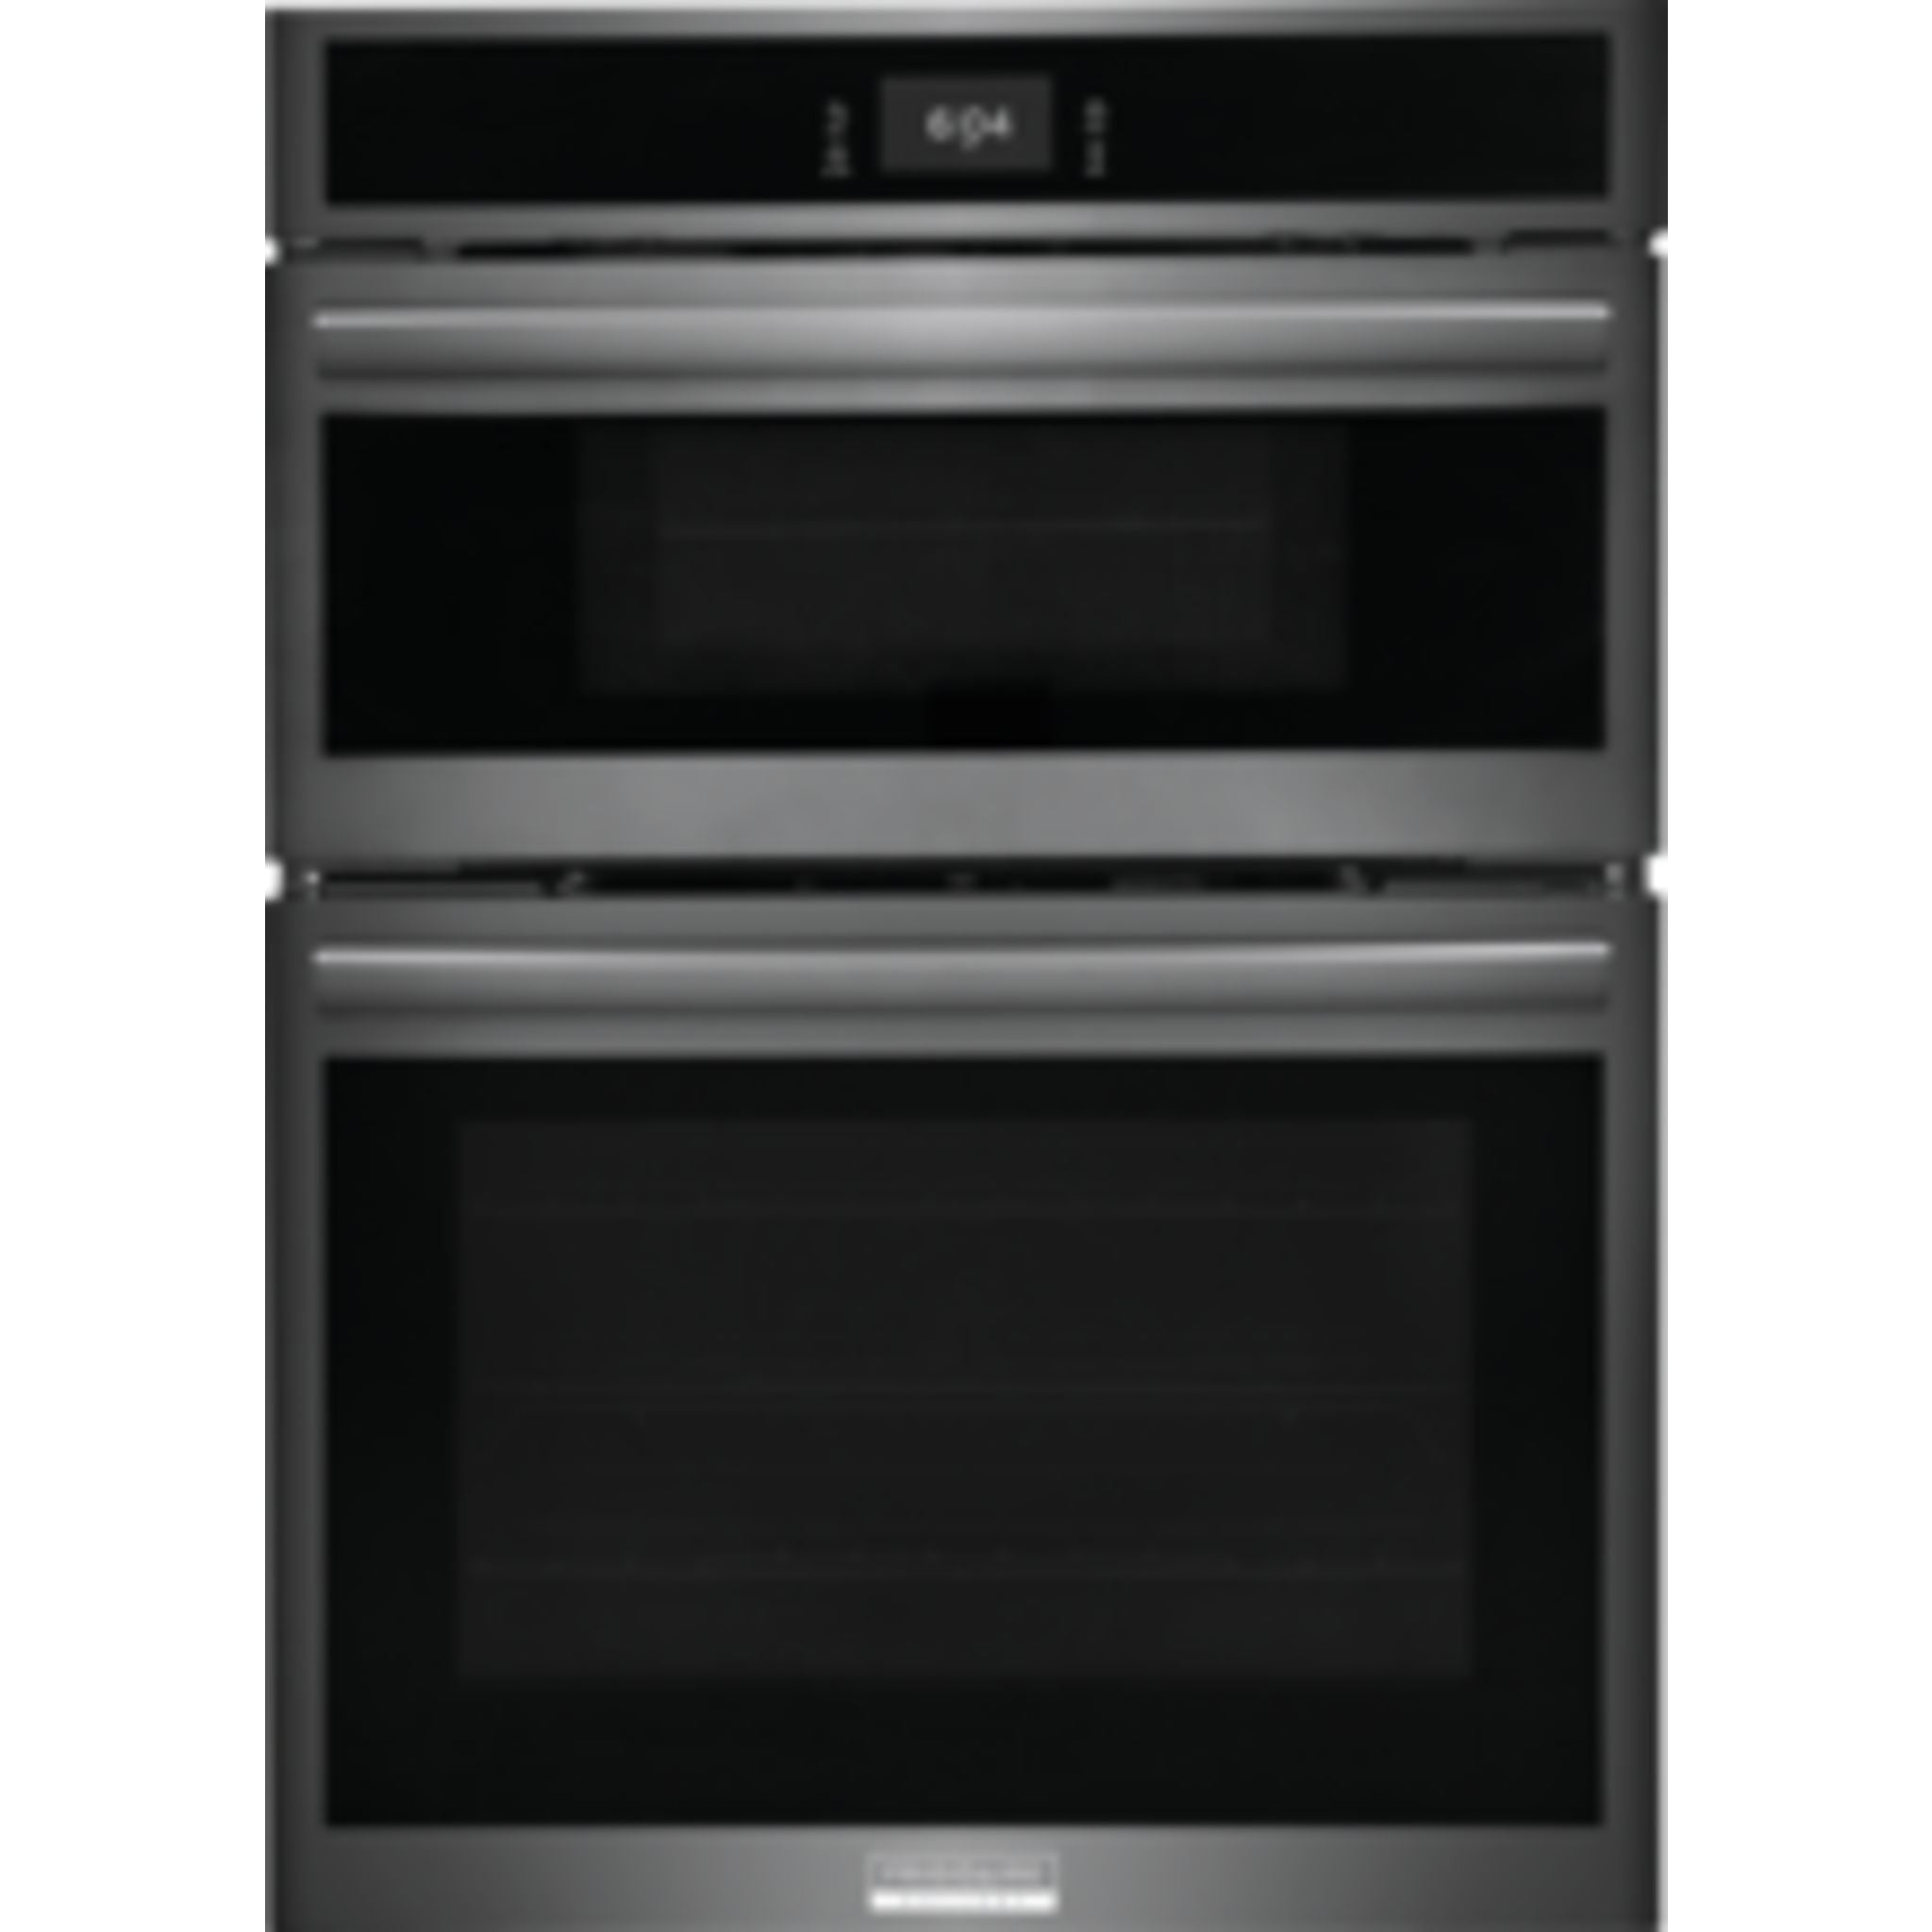 Frigidaire Gallery, Frigidaire Gallery 30" Microwave/Wall Oven (GCWM3067AD) - Stainless Steel